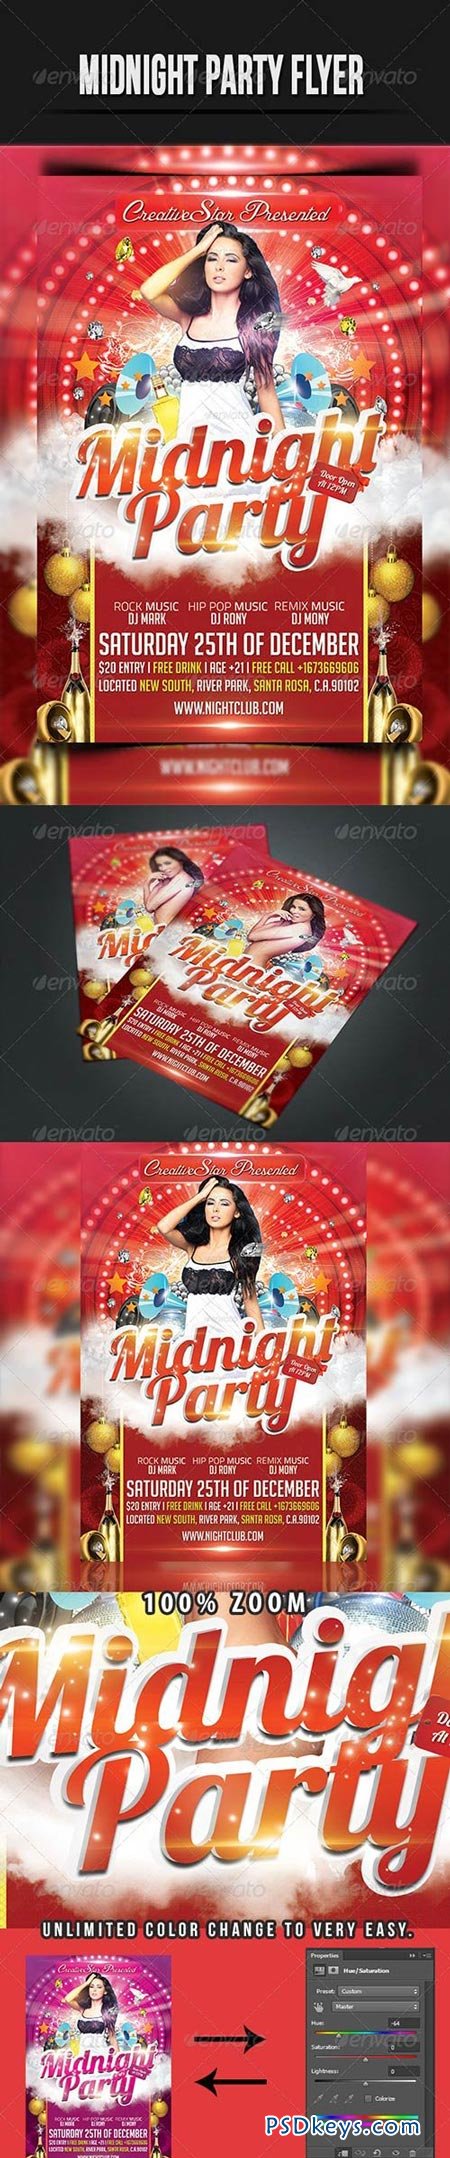 MidNight Party Flyer Template 4579397